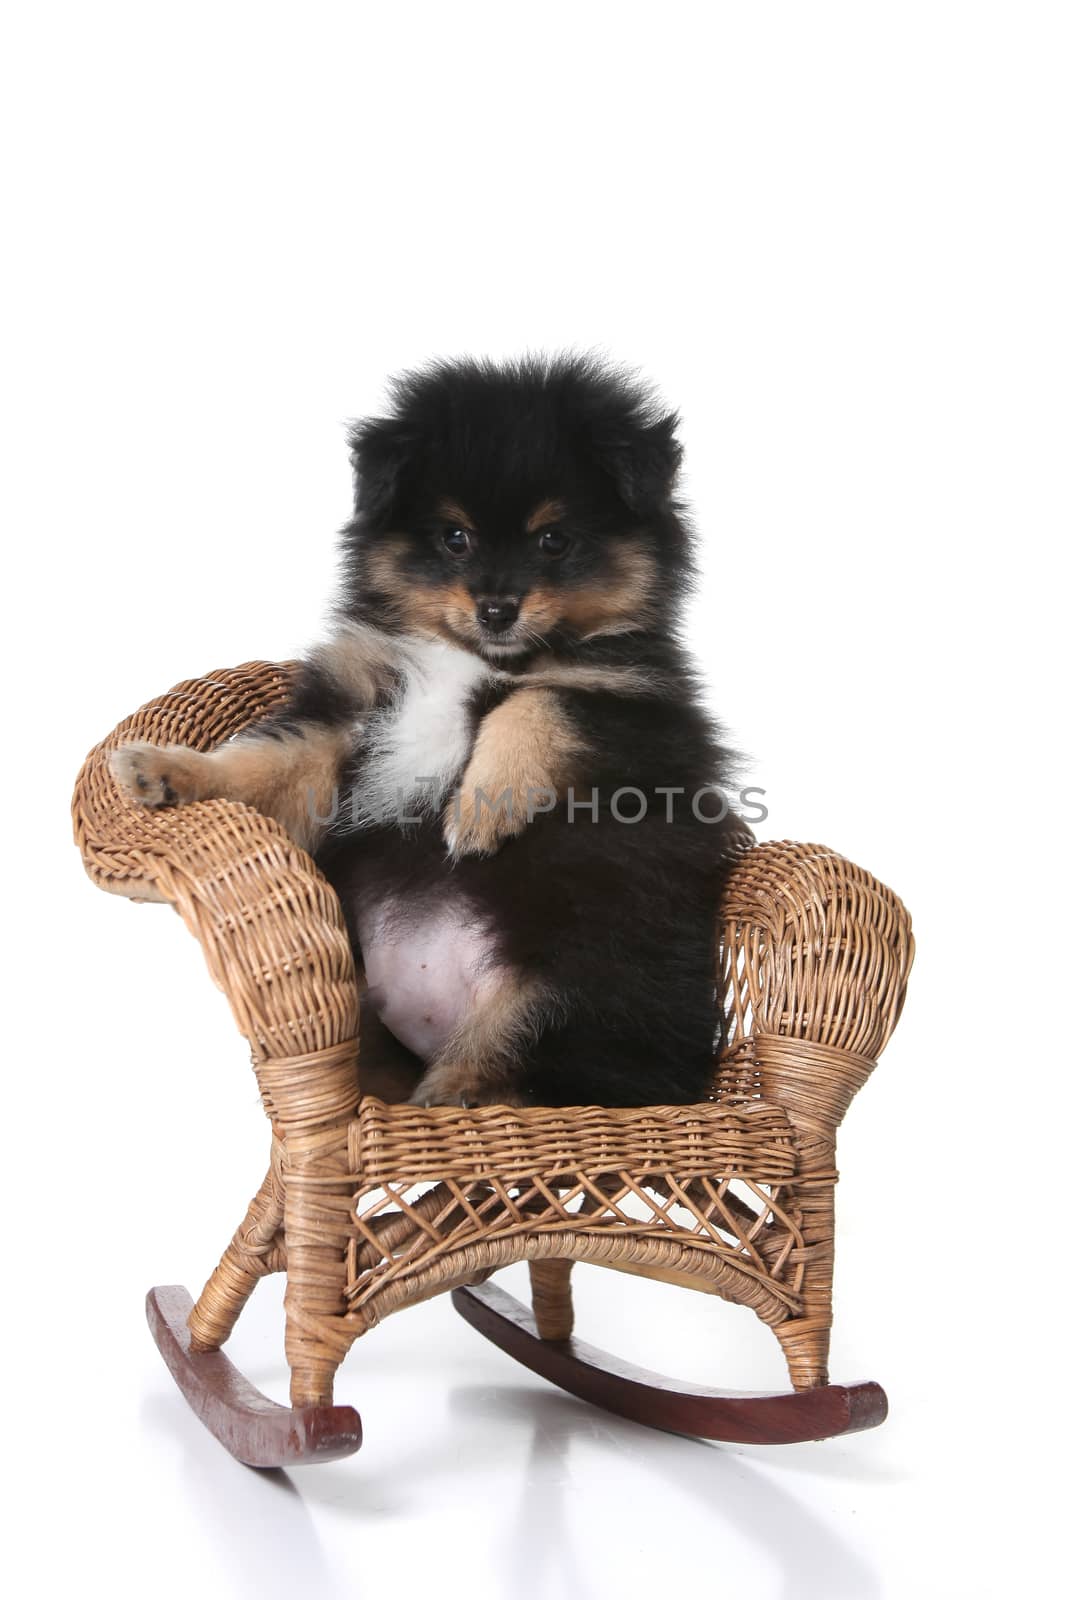 Adorable Puppy Sitting in a Miniature Wicker Chair Posing Upright